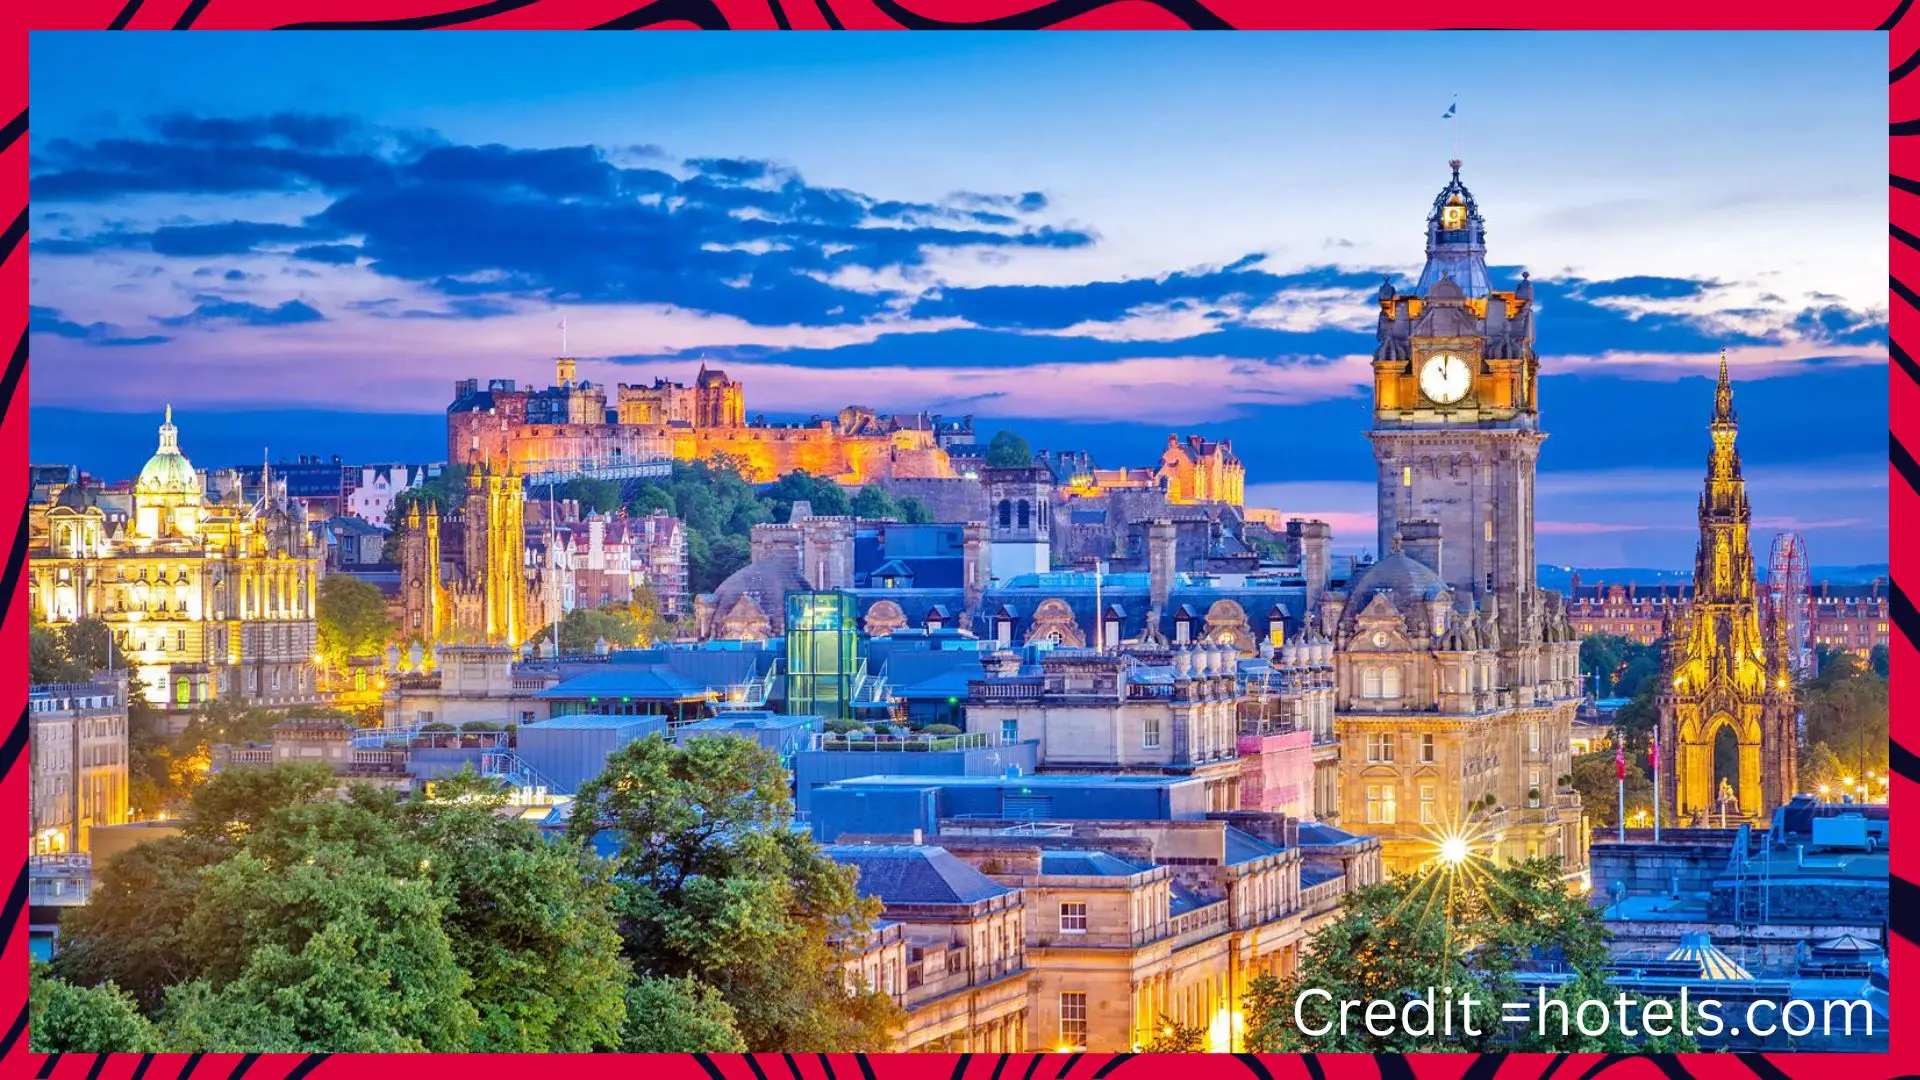 Edinburgh is the 3rd most popular city in the UK.